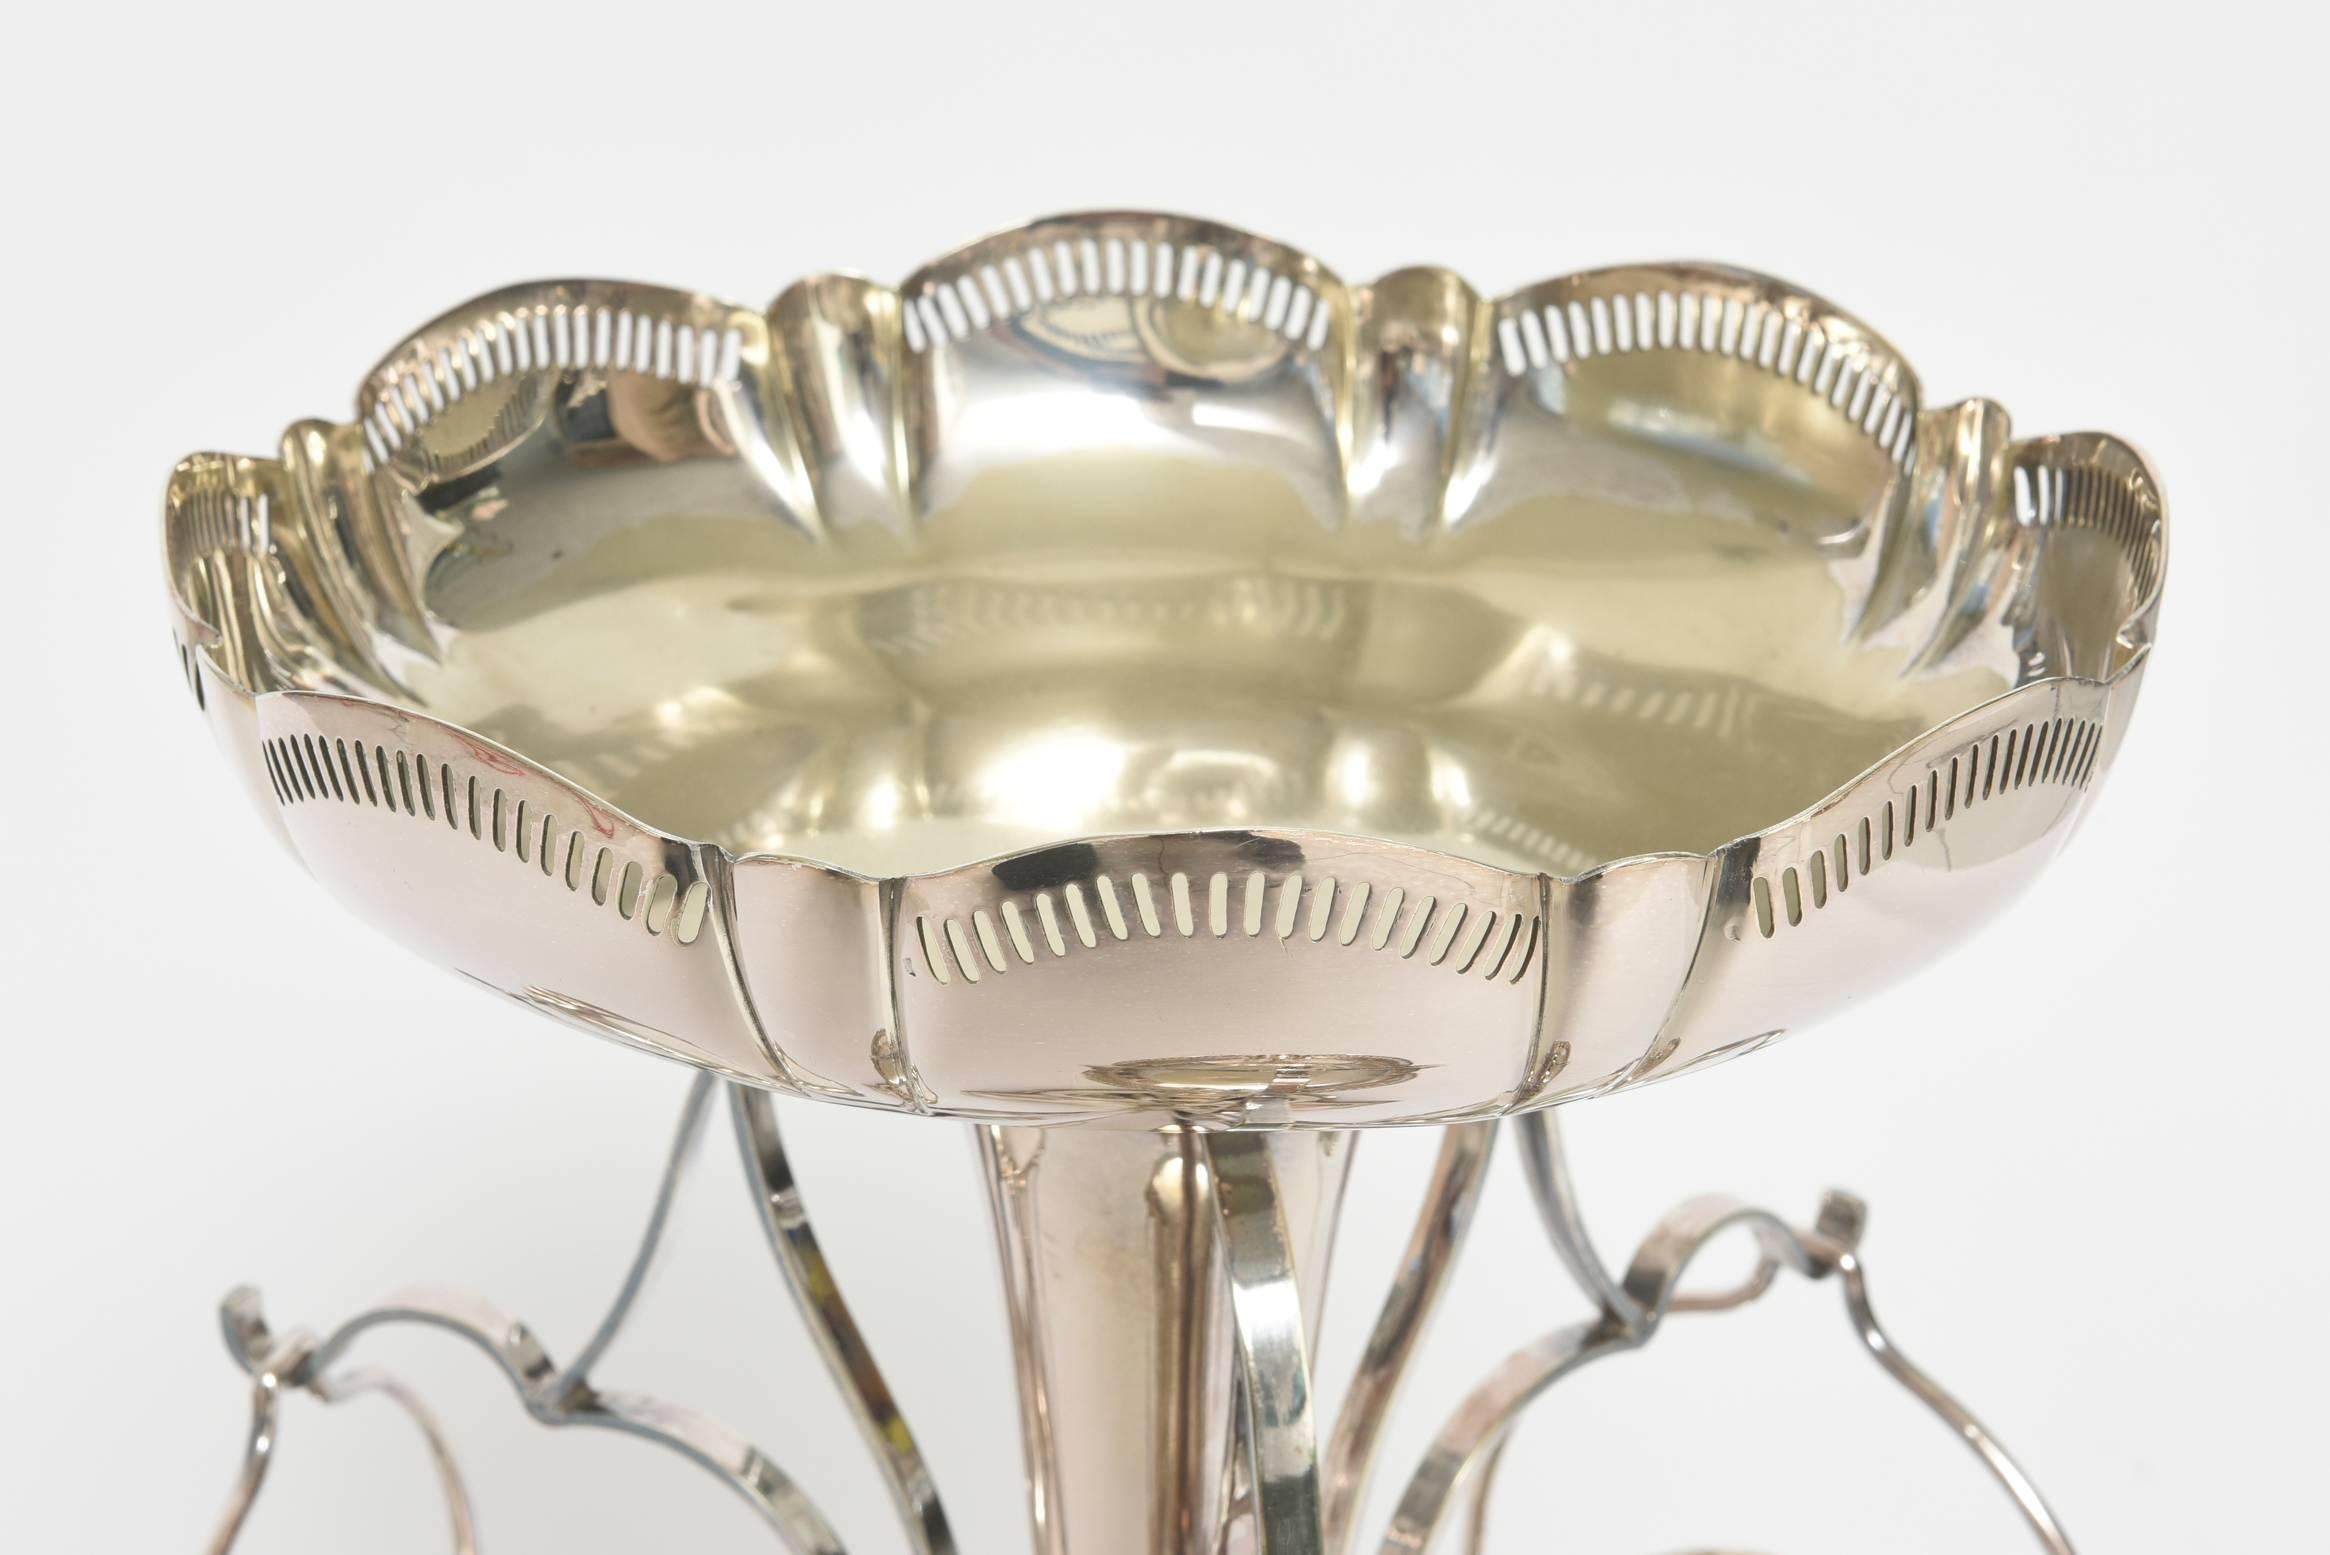 epergne silver plate centerpiece